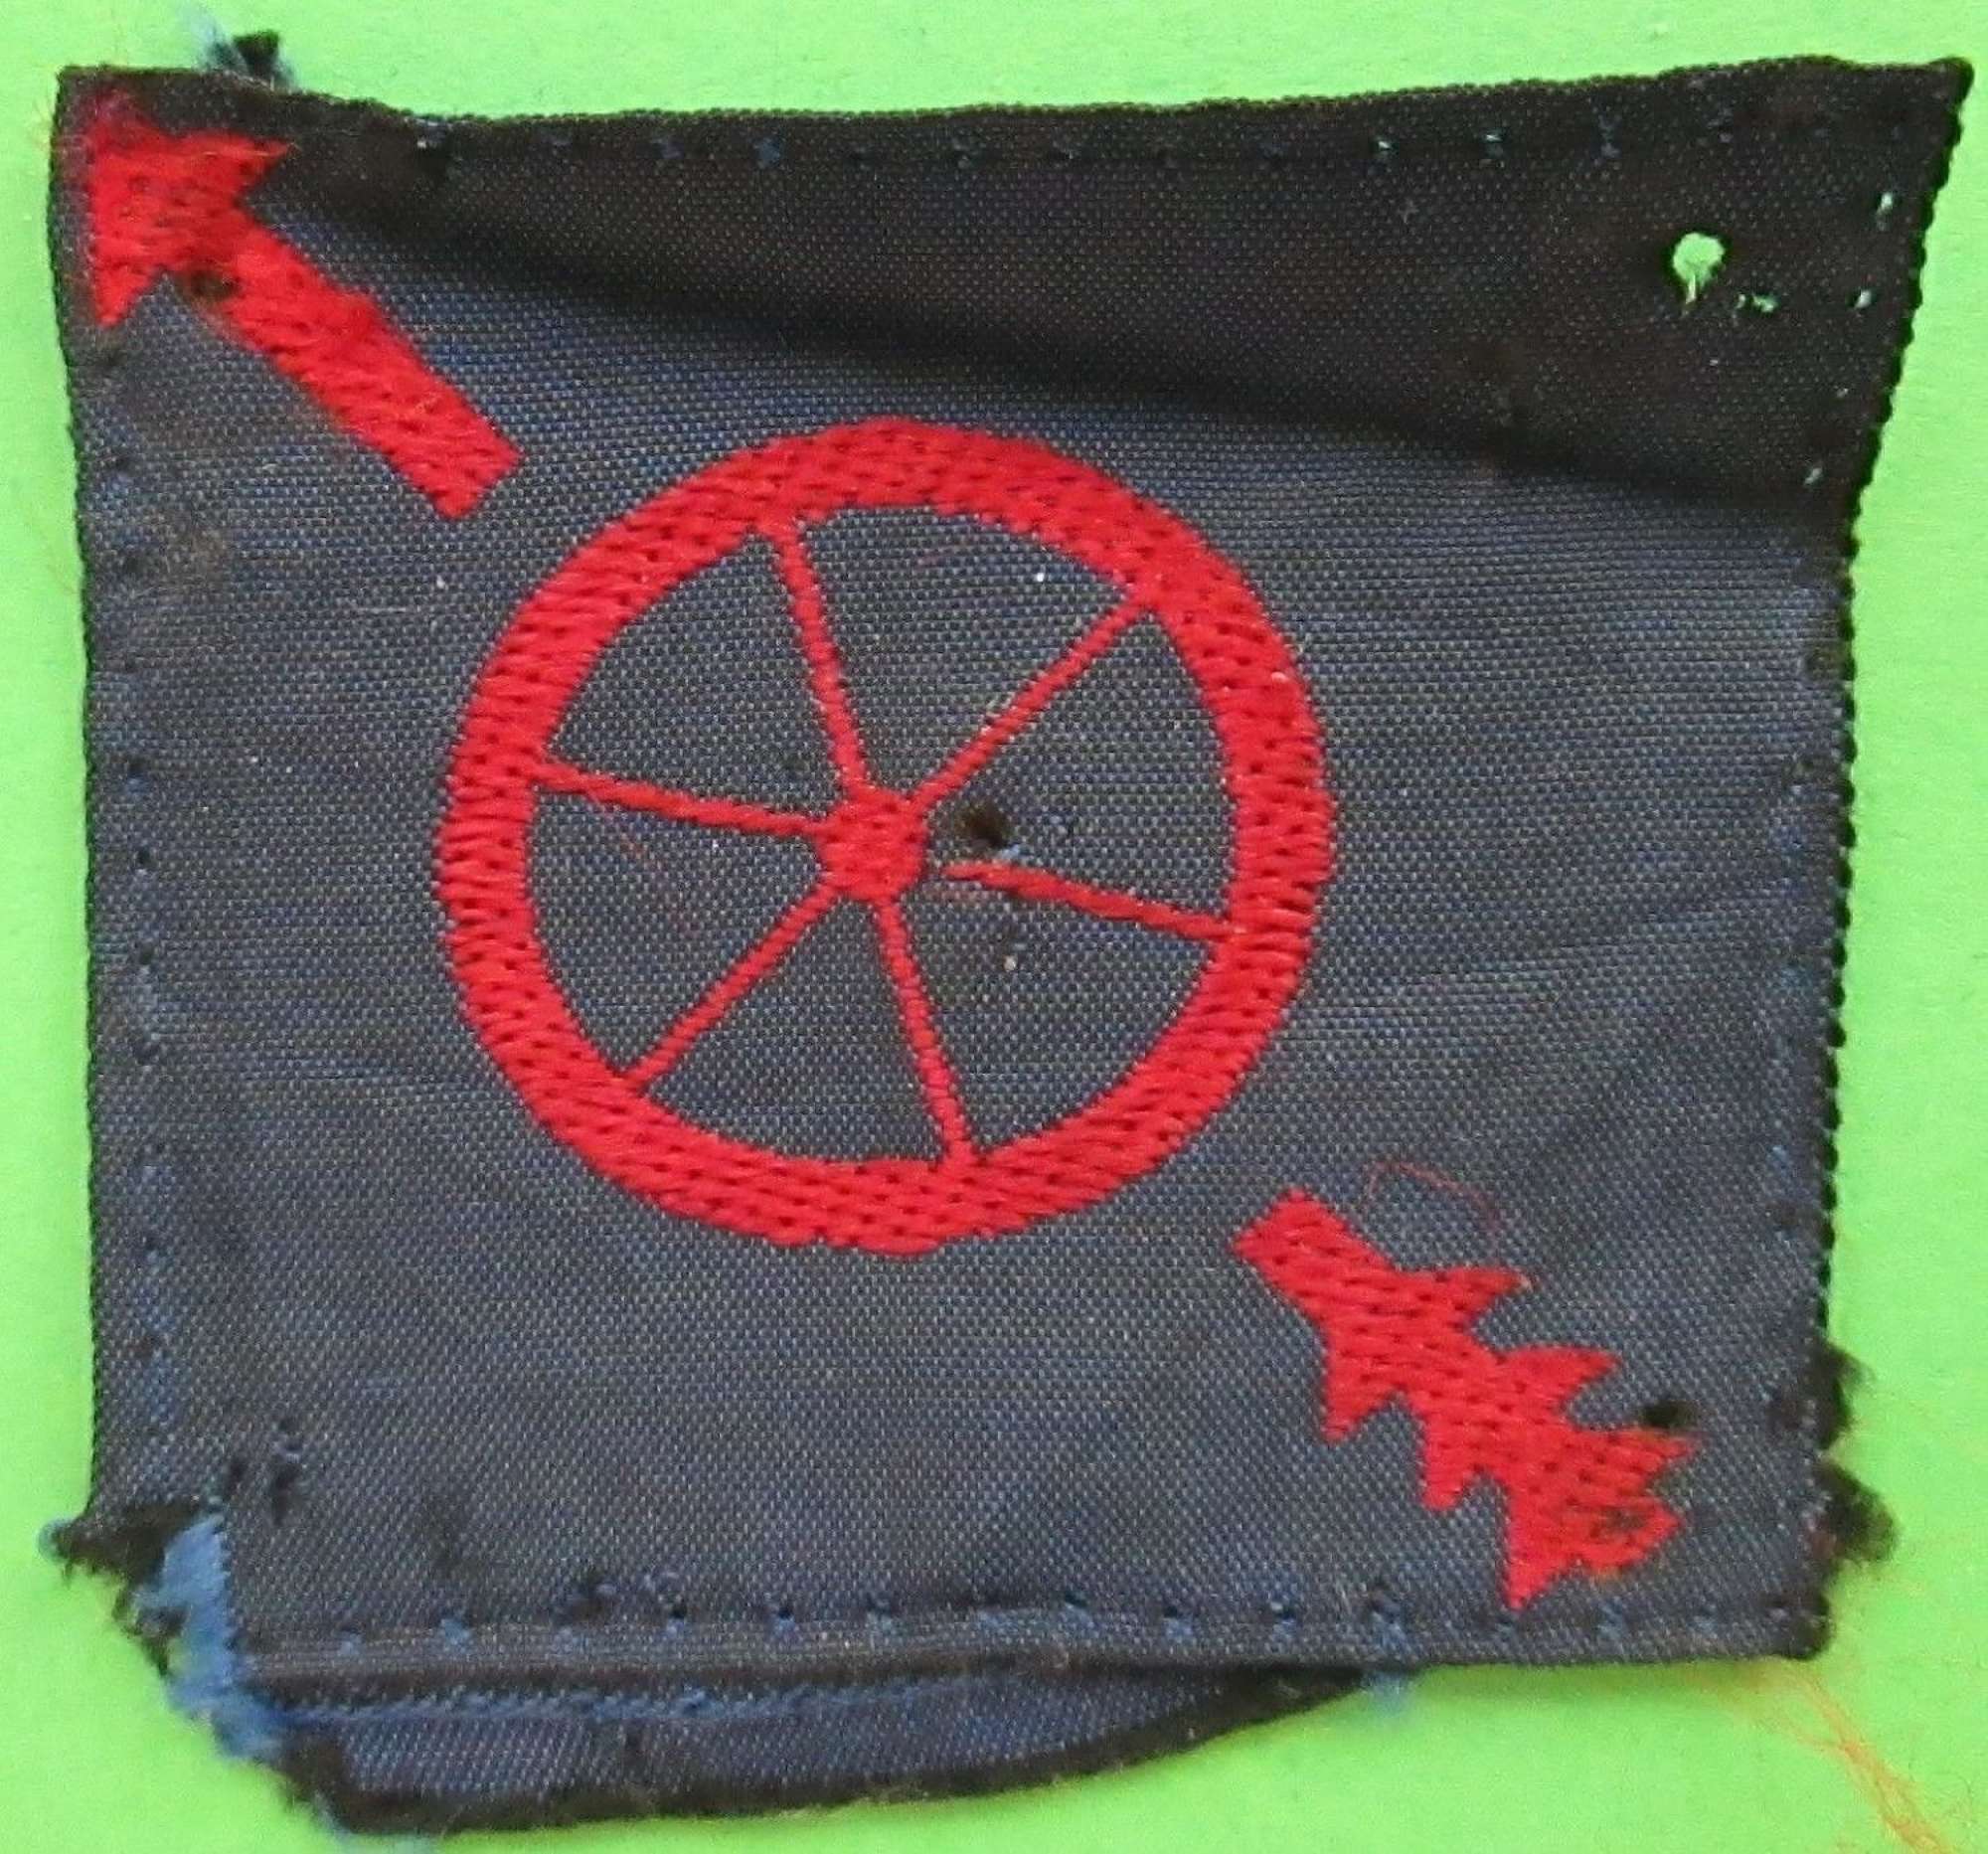 A GOOD USED 5TH ARMY GROUP ROYAL ARTILLERY FORMATION PATCH